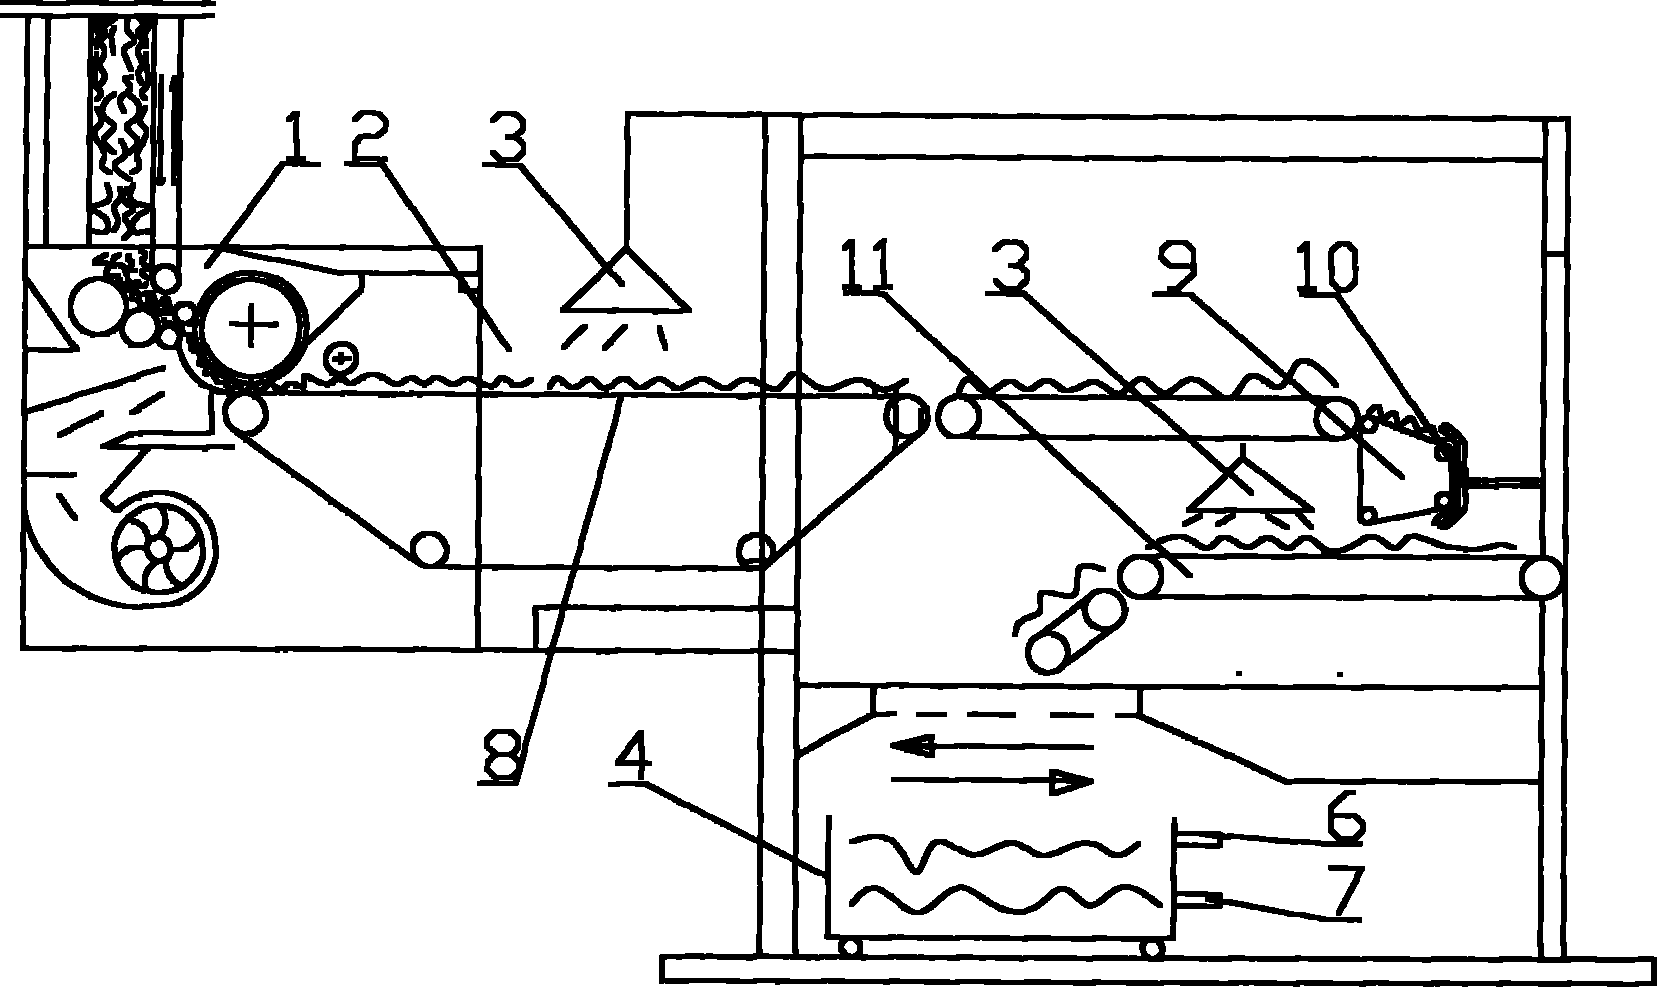 Integrated production method and device for plant fiber mattress